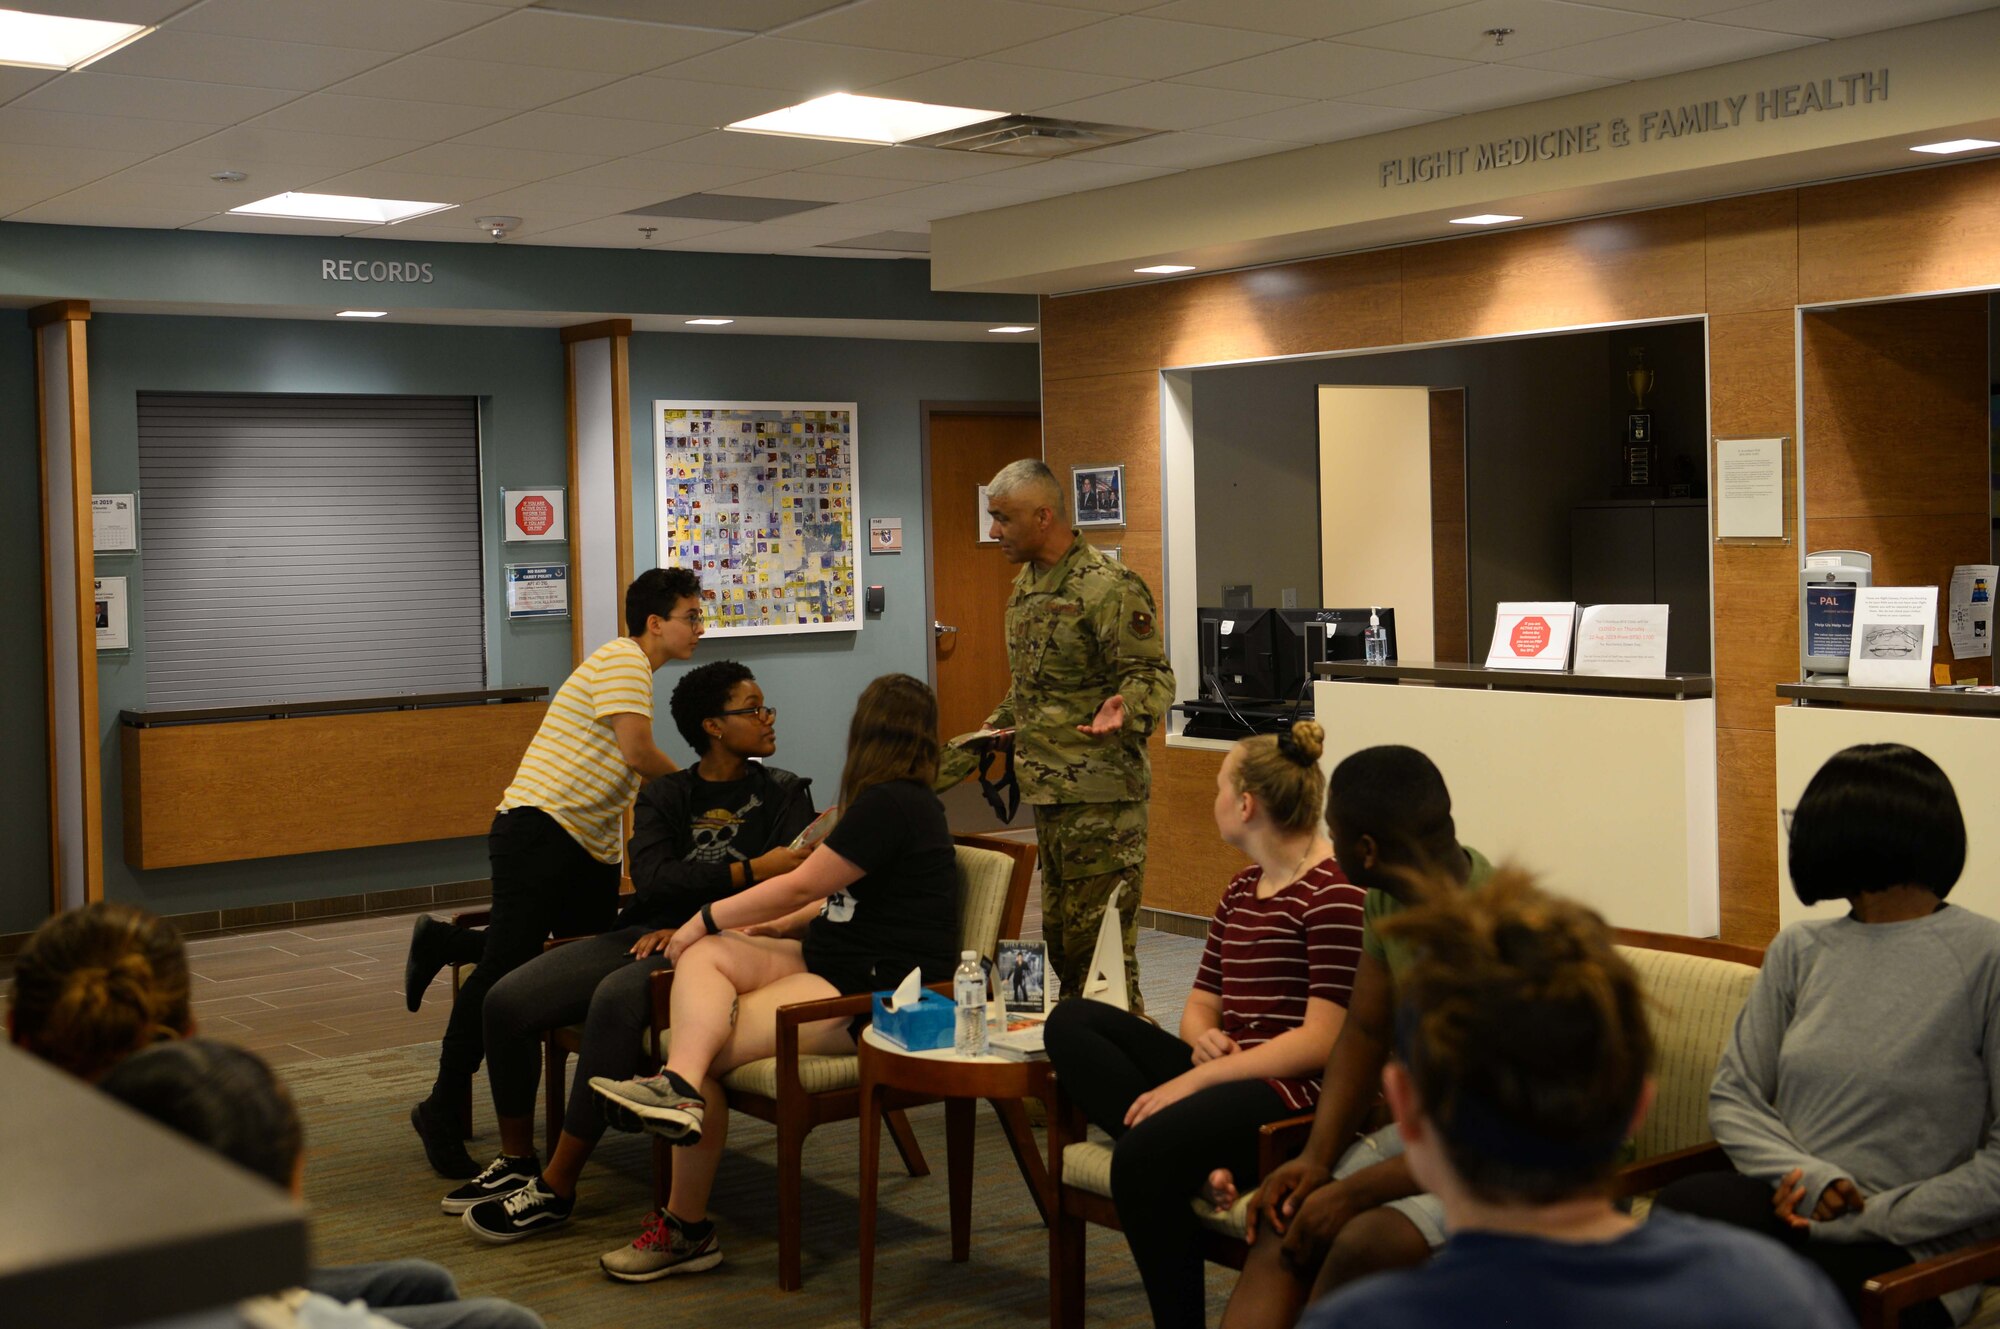 Chief Master Sgt. Raul Villarreal Jr., 14th Flying Training Wing command chief, visits Airmen from the 14th Medical Group Aug. 22, 2019, on Columbus Air Force Base, Miss. While squadrons participated in the Tactical Pause, senior leaders took time to personally interact and communicate with Airmen across Columbus AFB. (U.S. Air Force photo by Airman 1st Class Jake Jacobsen)